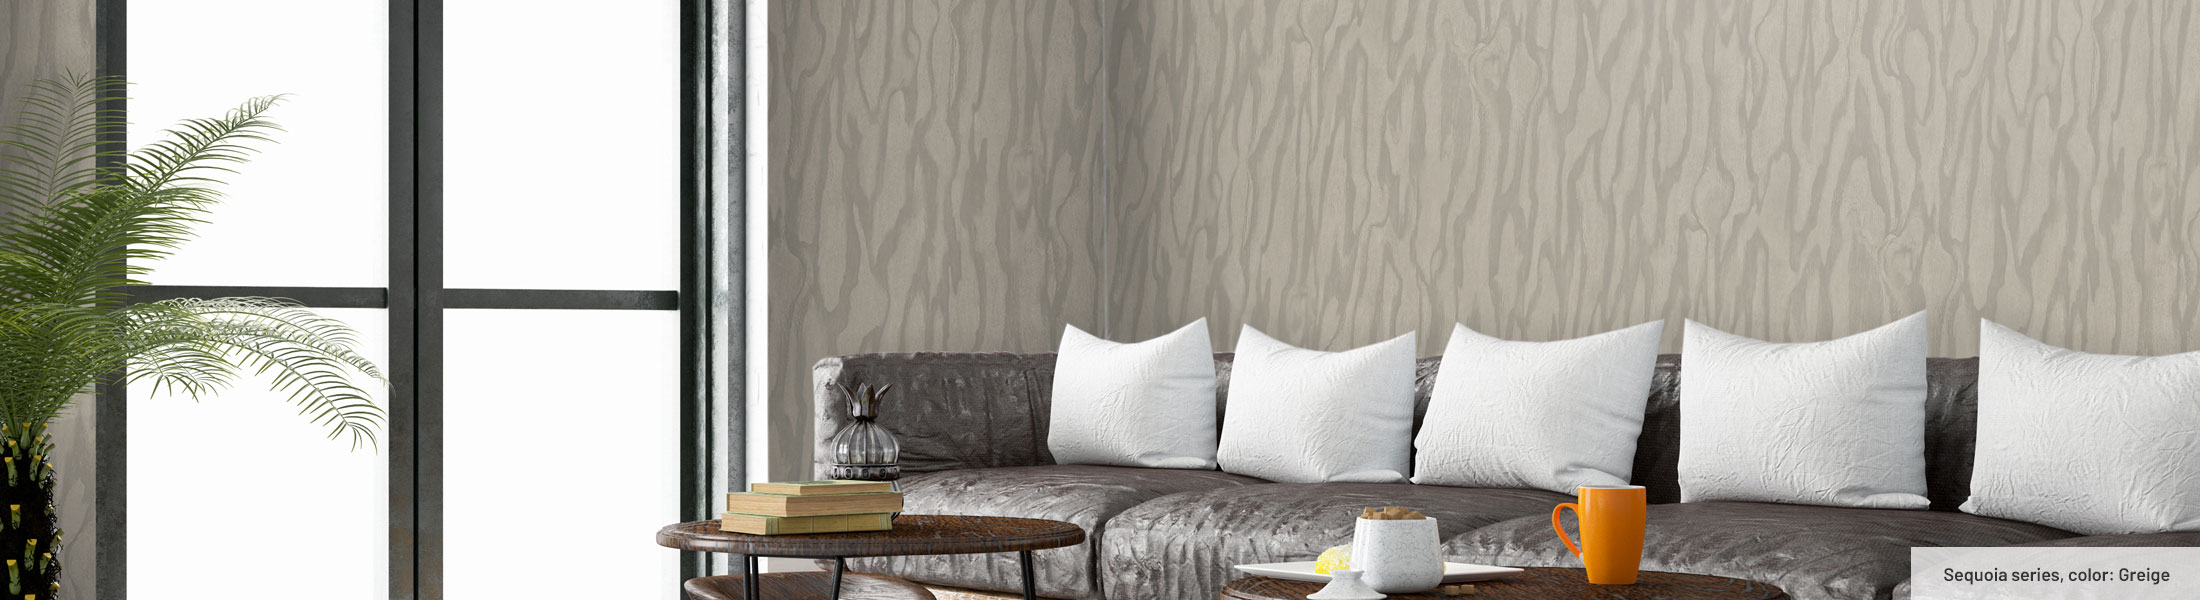 Commercial Wallcovering Example